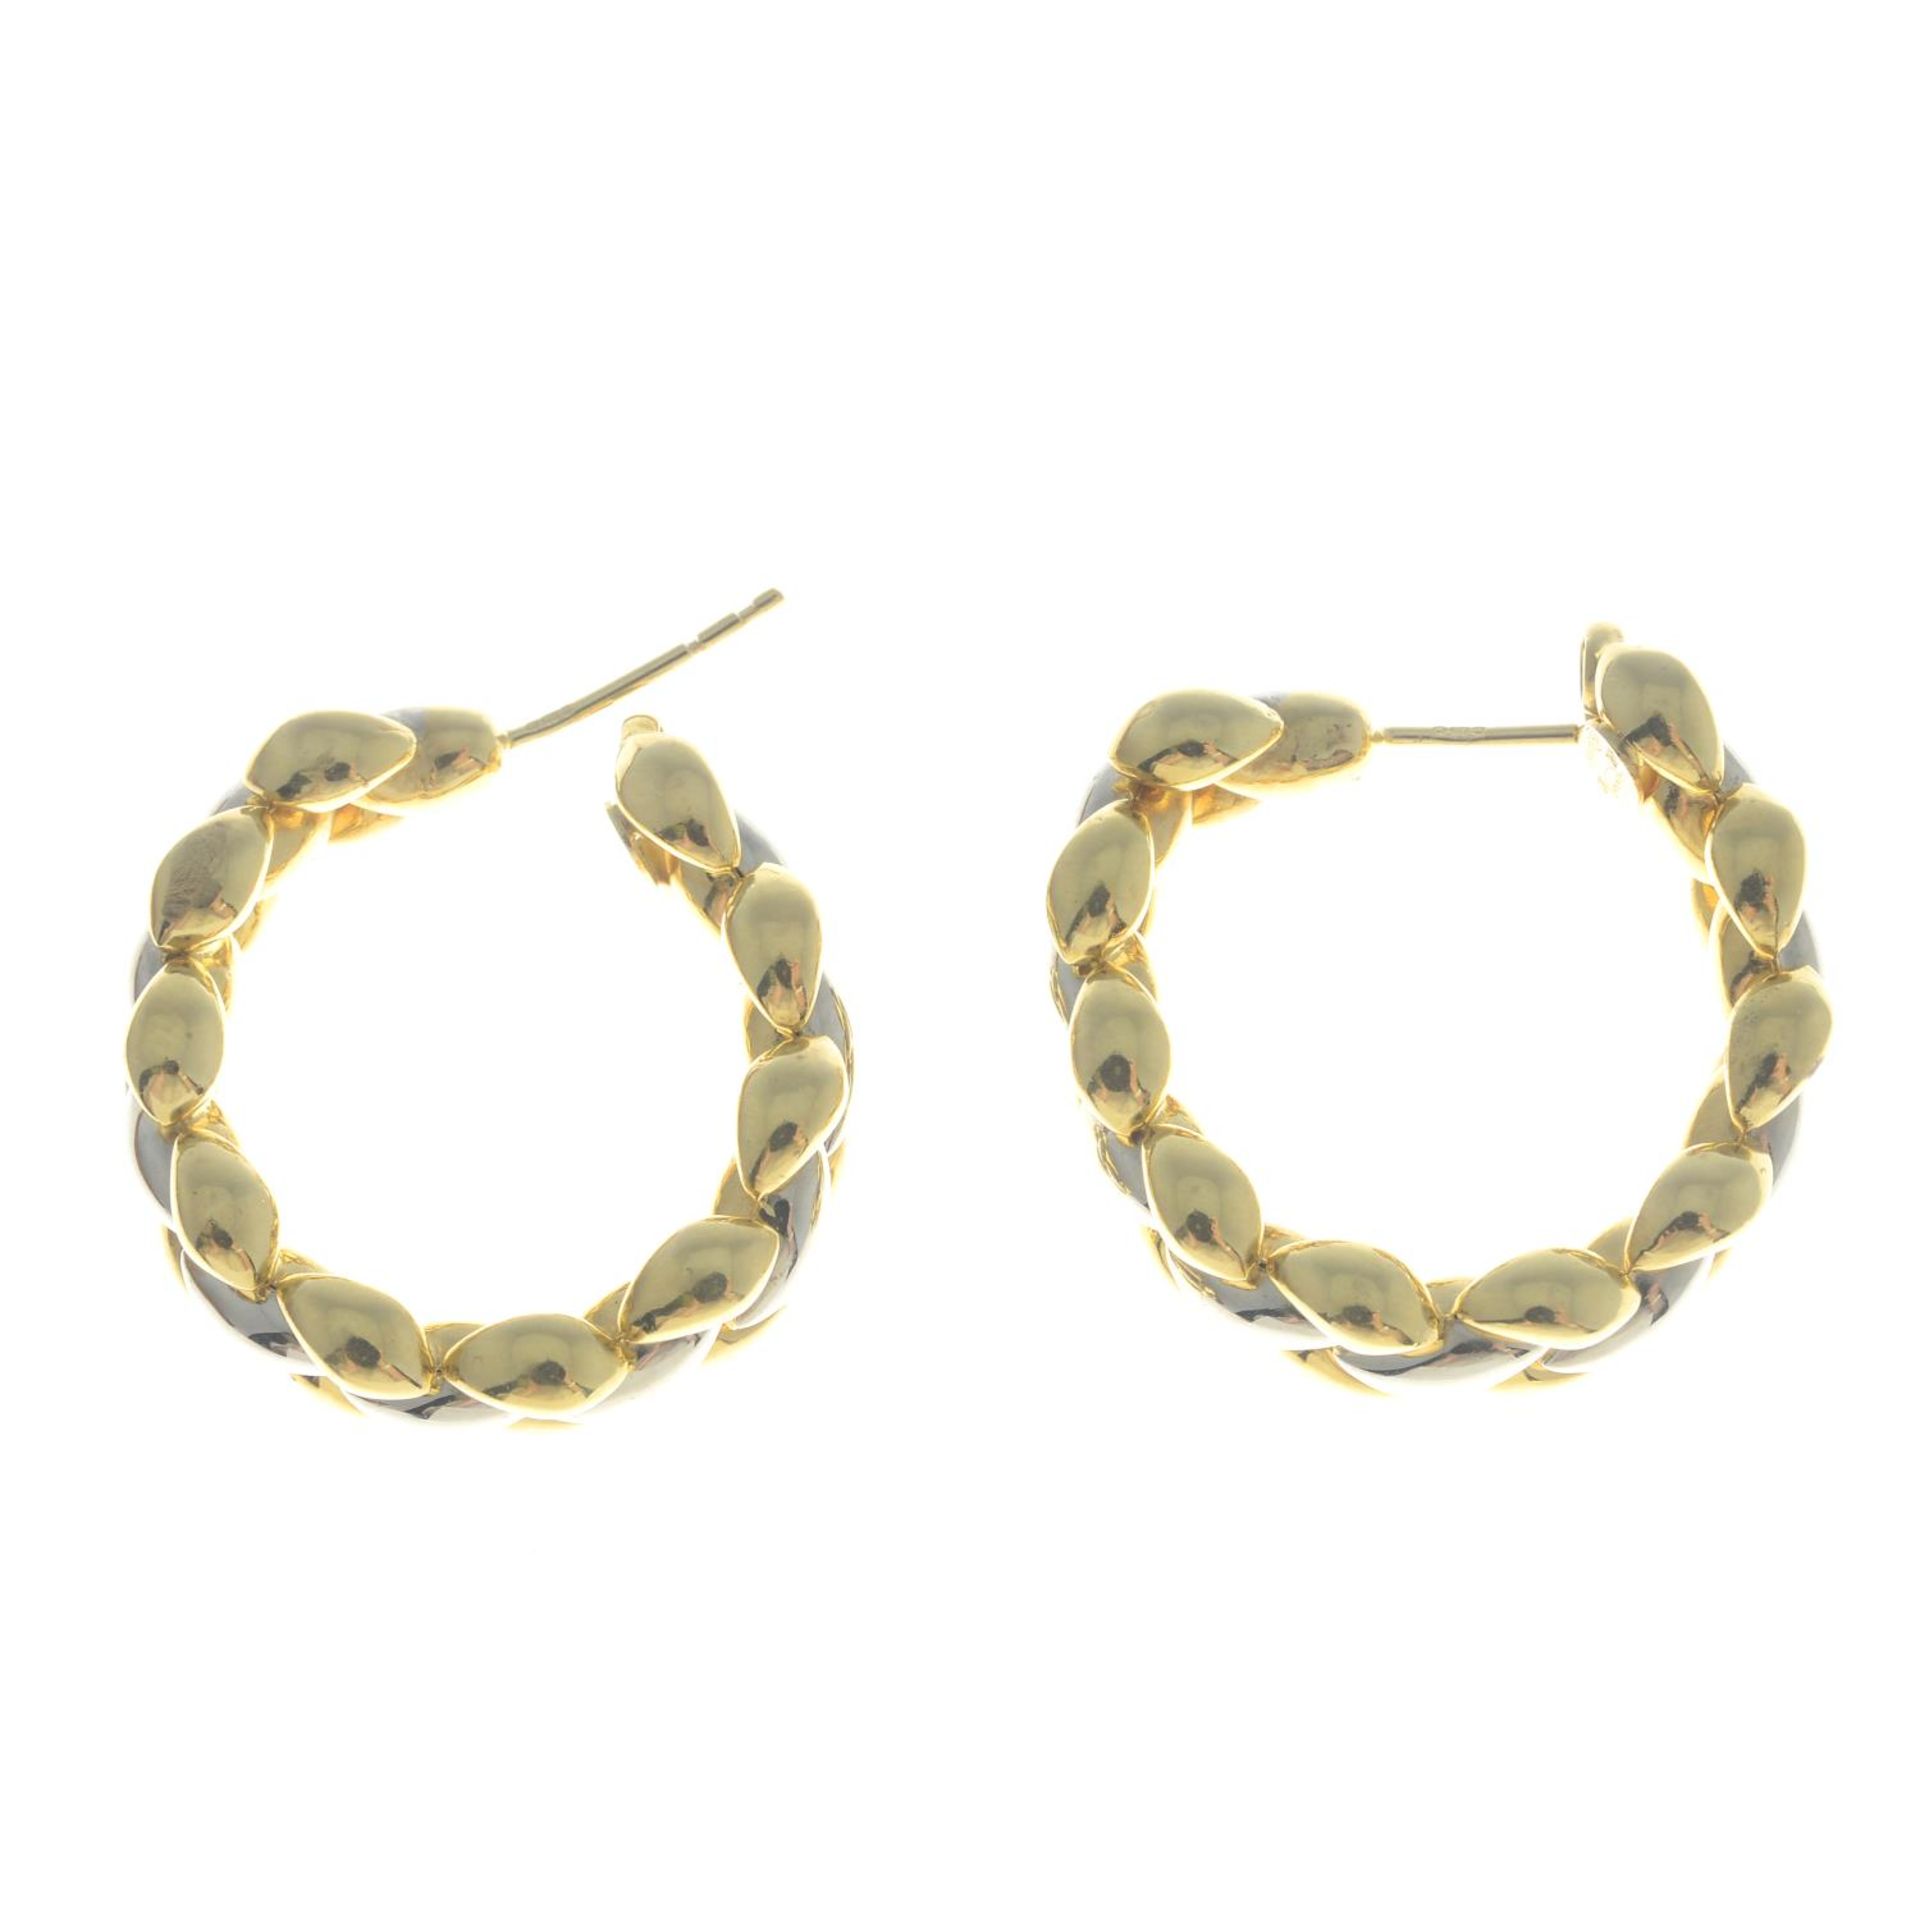 A pair of bi-colour 18ct gold hoop earrings, by Chimento.Signed Chimento. - Image 3 of 3